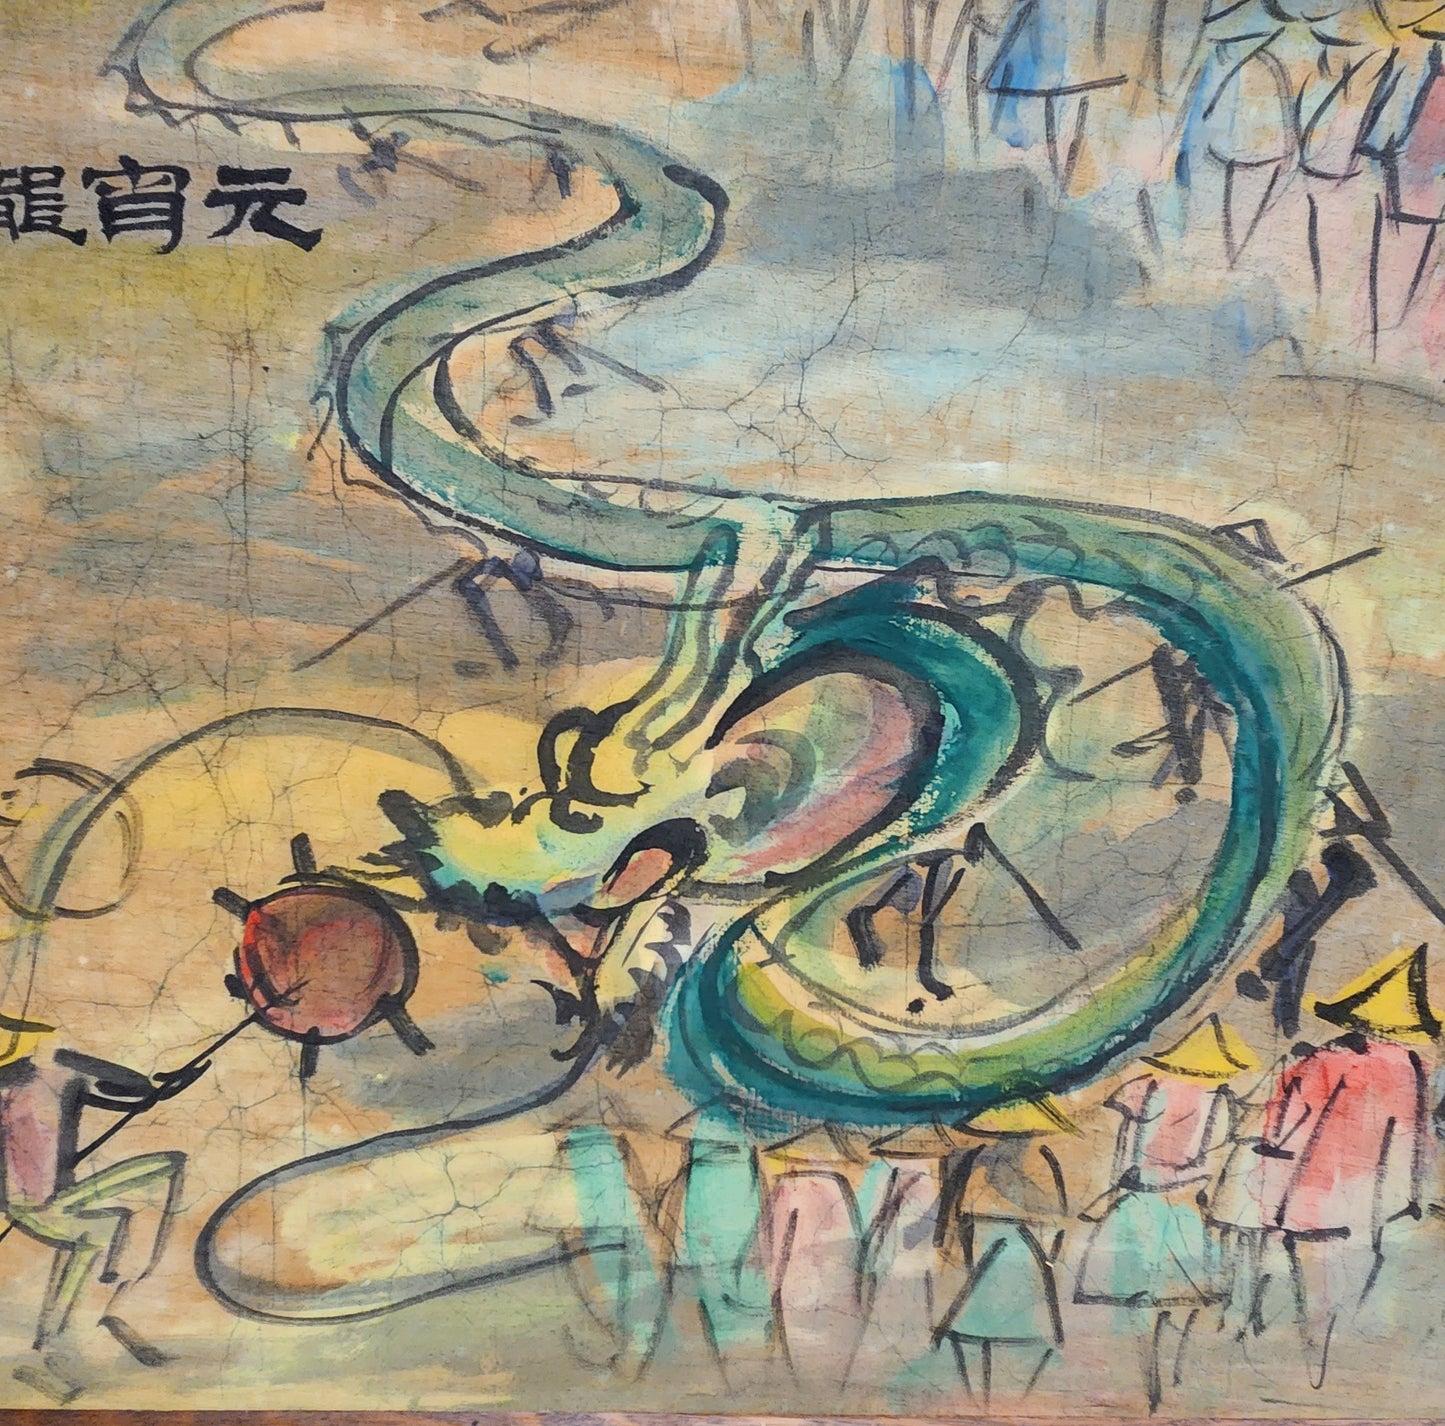 Vintage Original Chinese Dragon Painting on Canvas (or Silk)